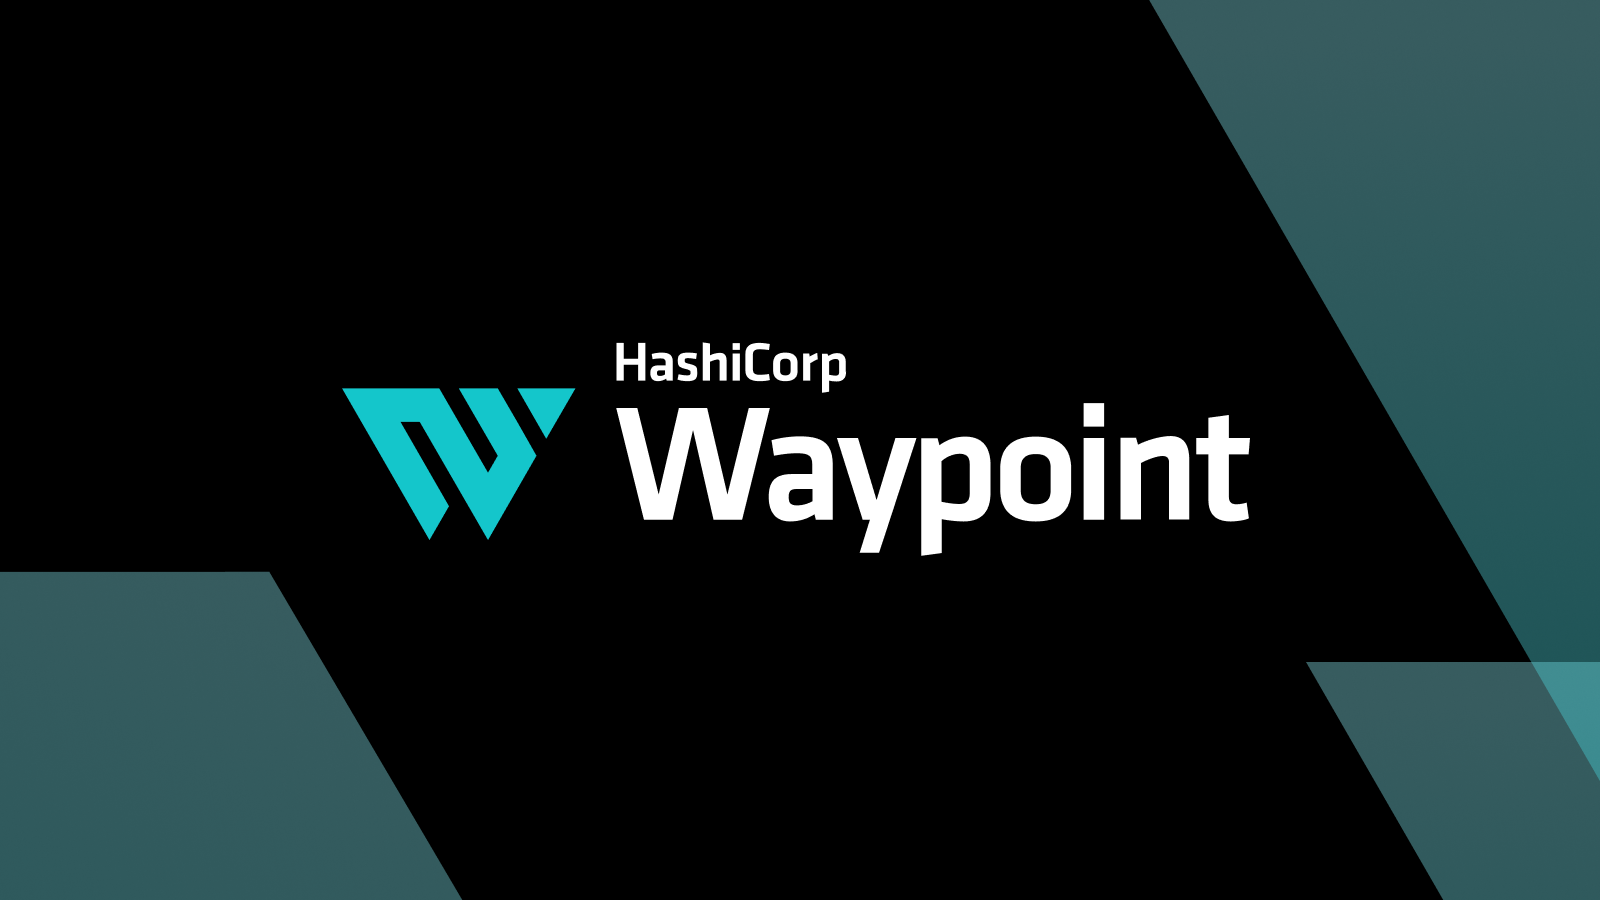 Announcing HashiCorp Waypoint